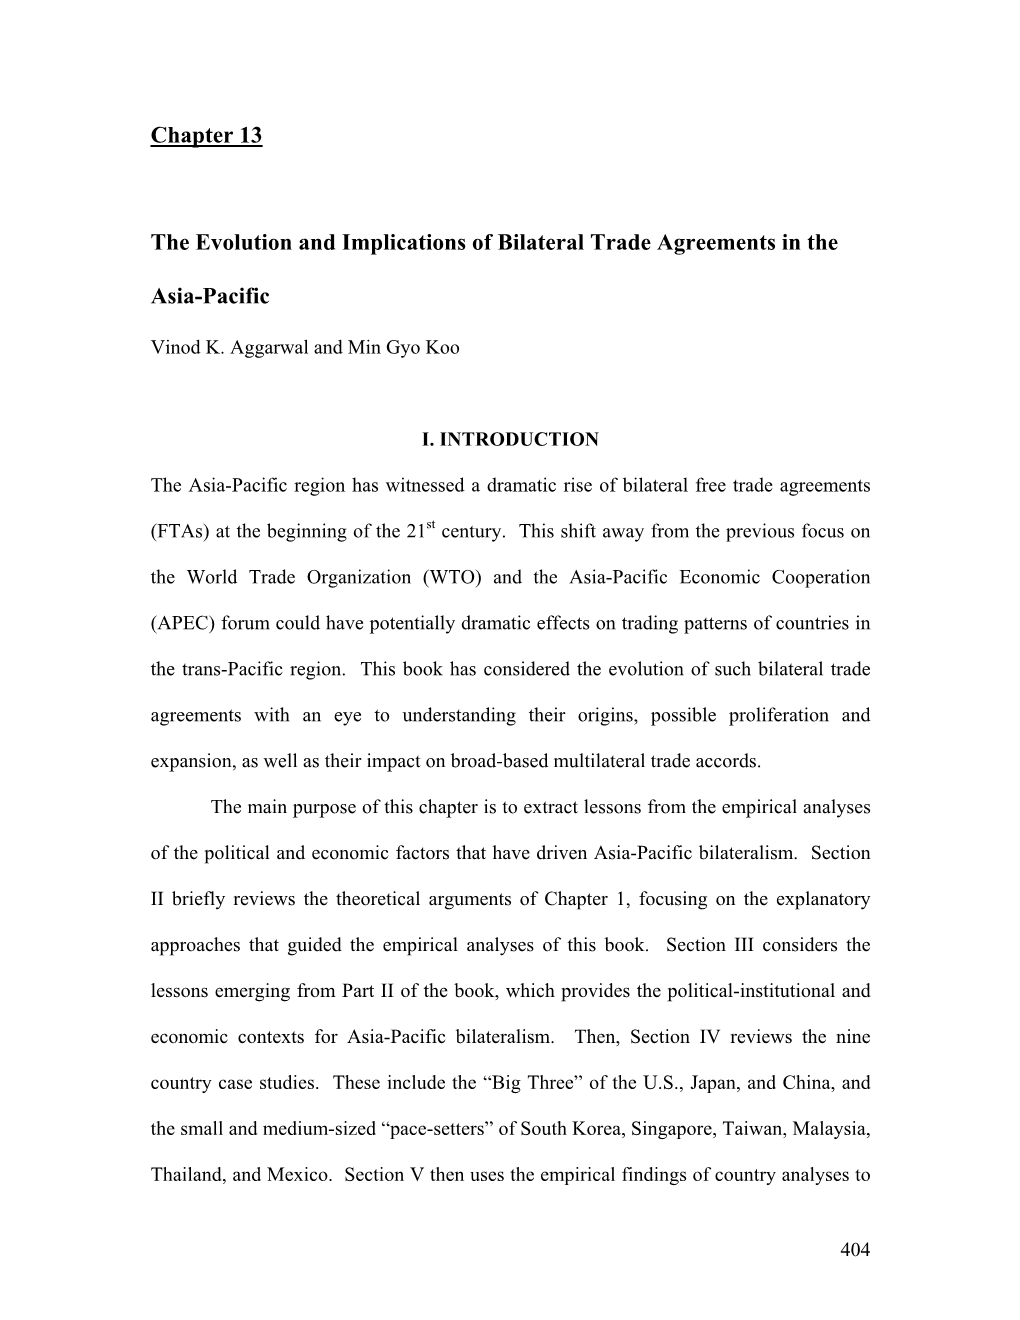 The Evolution and Implications of Bilateral Trade Agreements in The